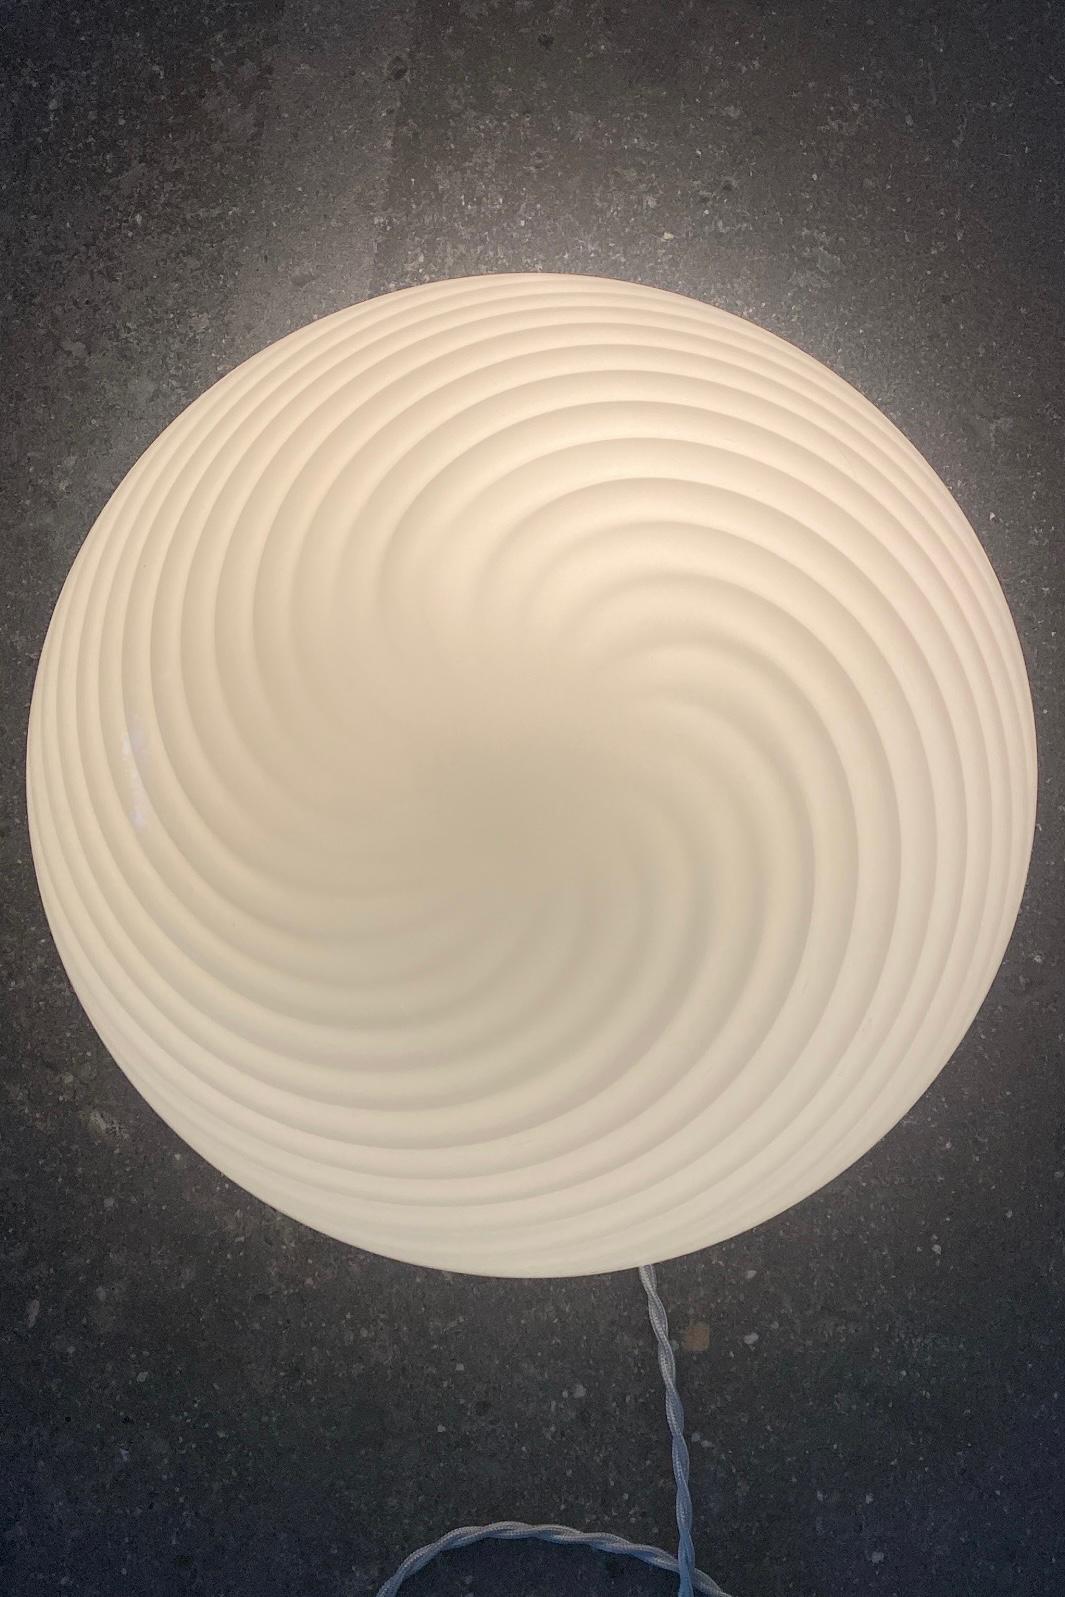 Large Vintage Murano 1970s Flush Mount Wall Ceiling Lamp in White Swirl Glass In Good Condition For Sale In Copenhagen, DK